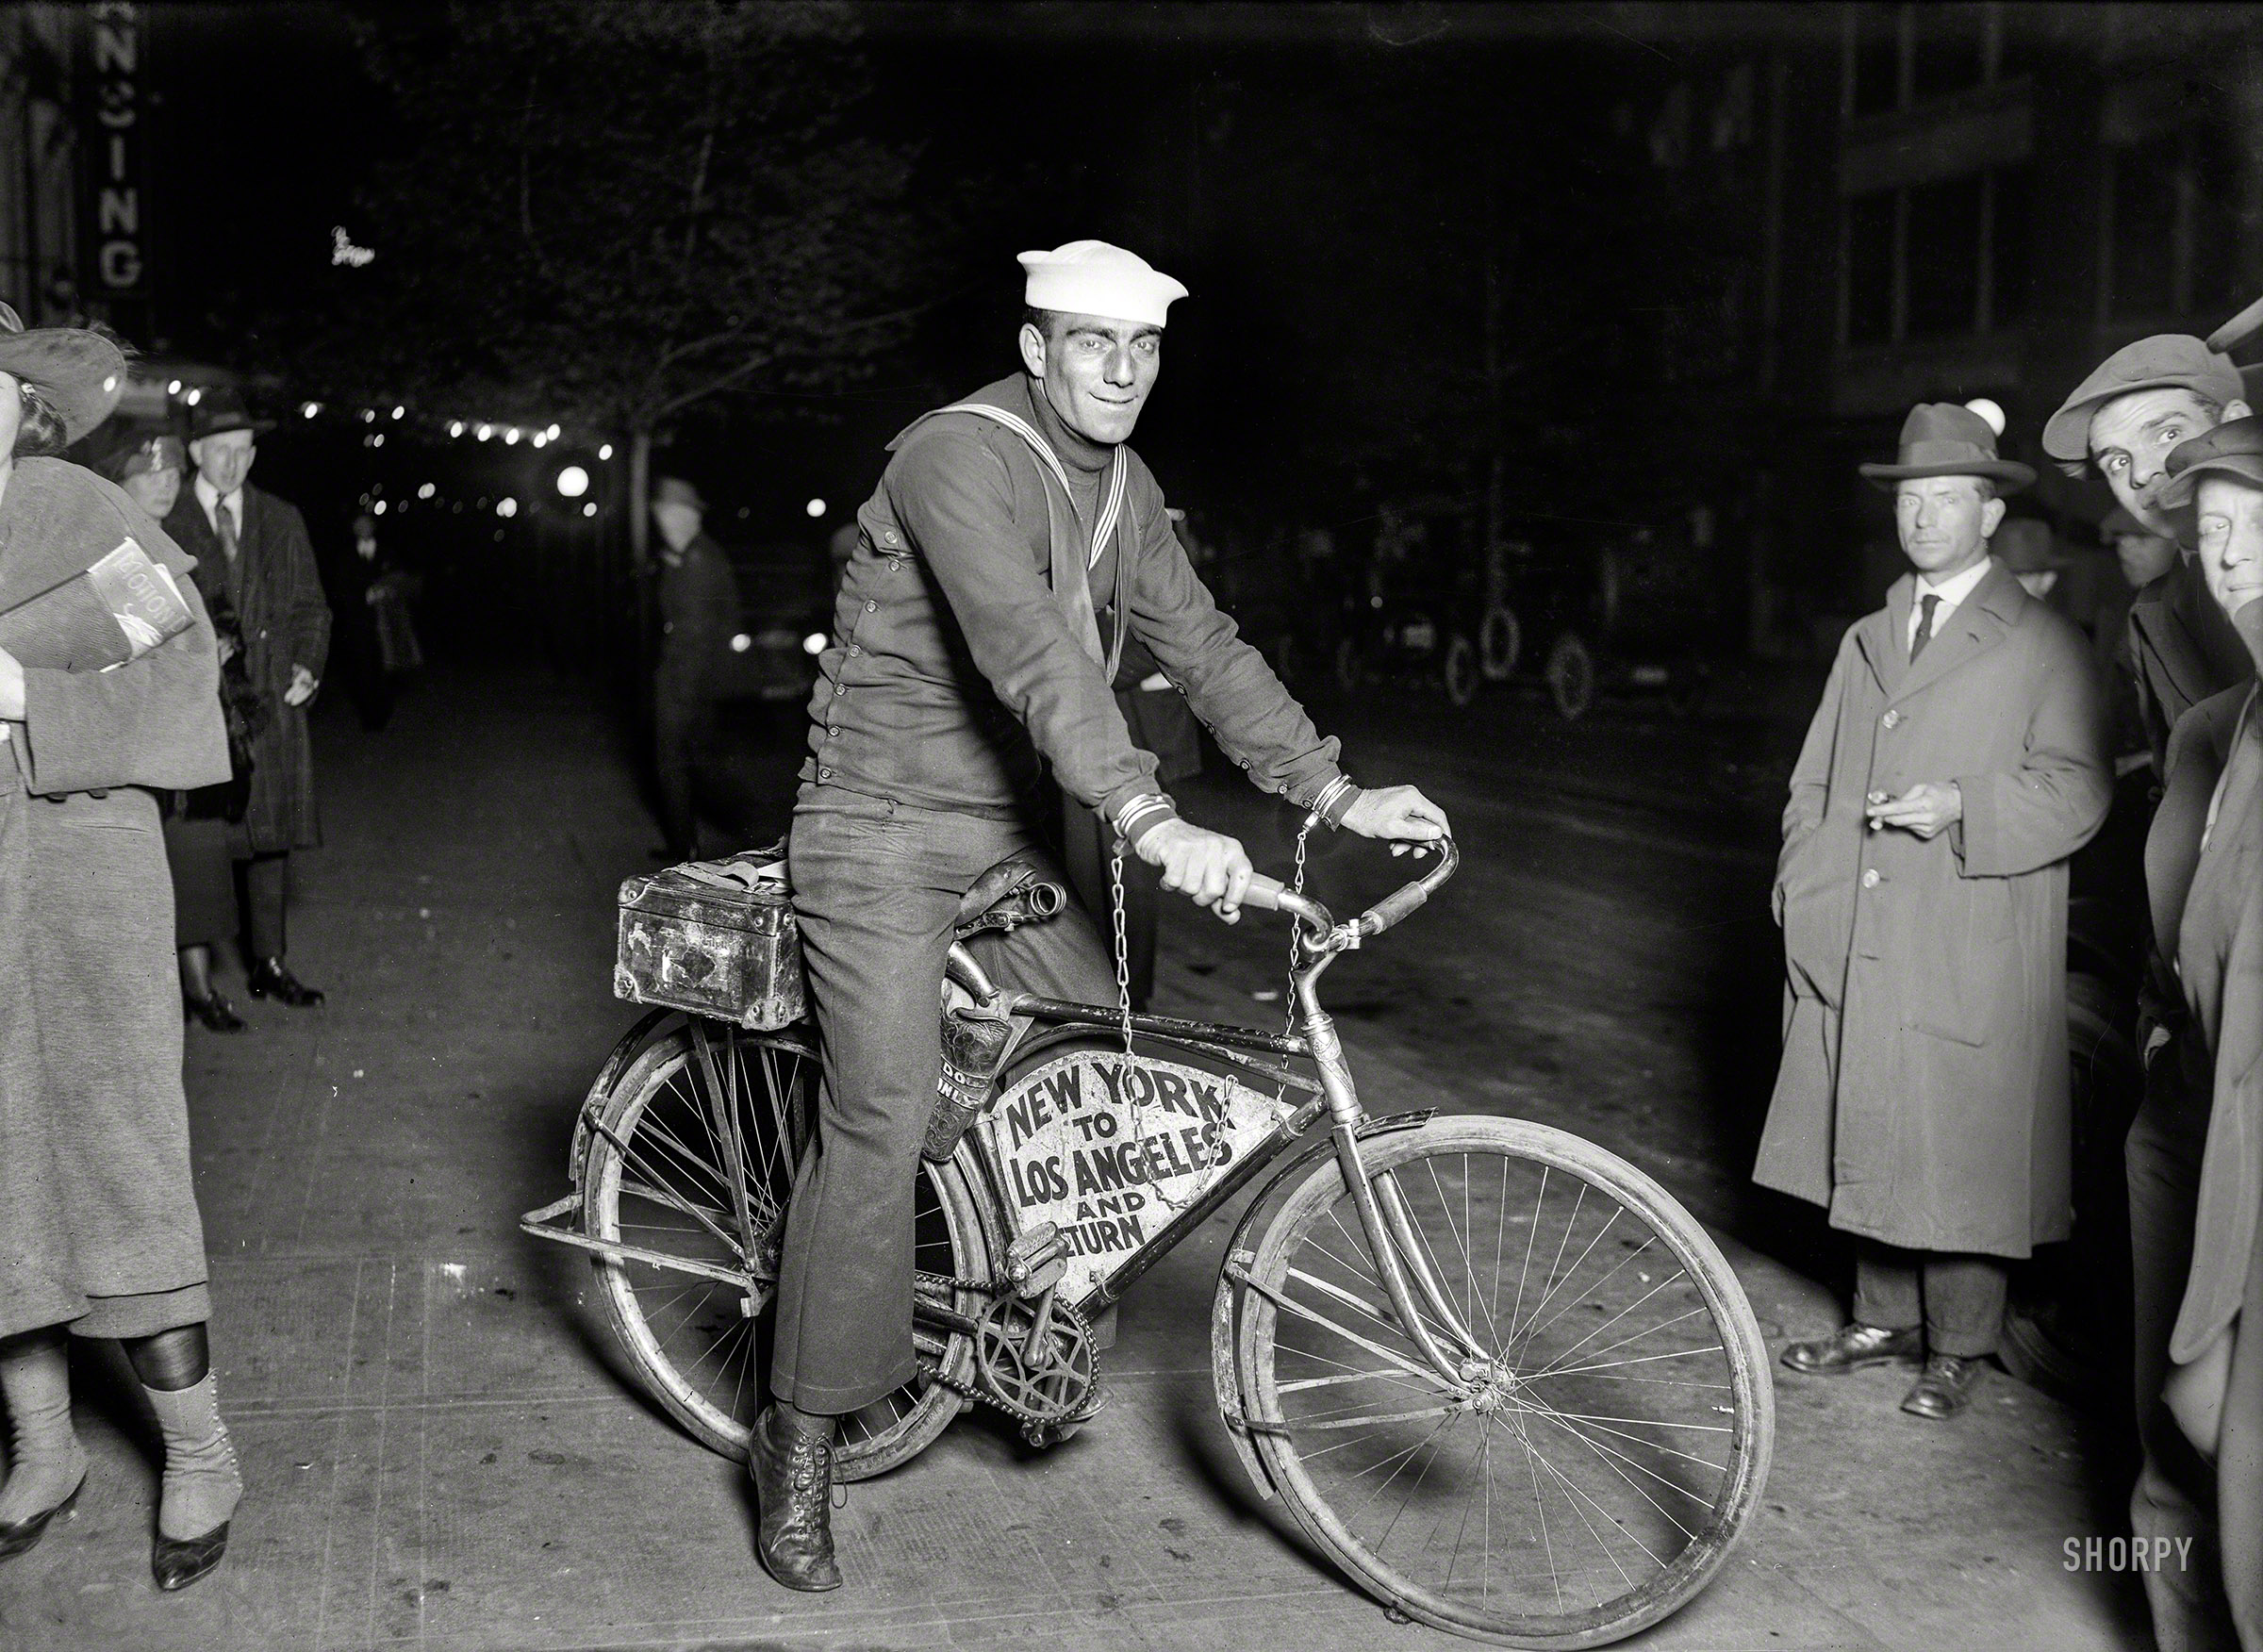 May 1920. "Sailor Tony Pizzo passing through Washington on a Coast to Coast bicycle run handcuffed to his machine. The handcuffs were sealed by Mayor Hylan in New York April 24 and are not to be opened until his return to that city. Pizzo made a California to New York trip in like manner in 1919." View full size.